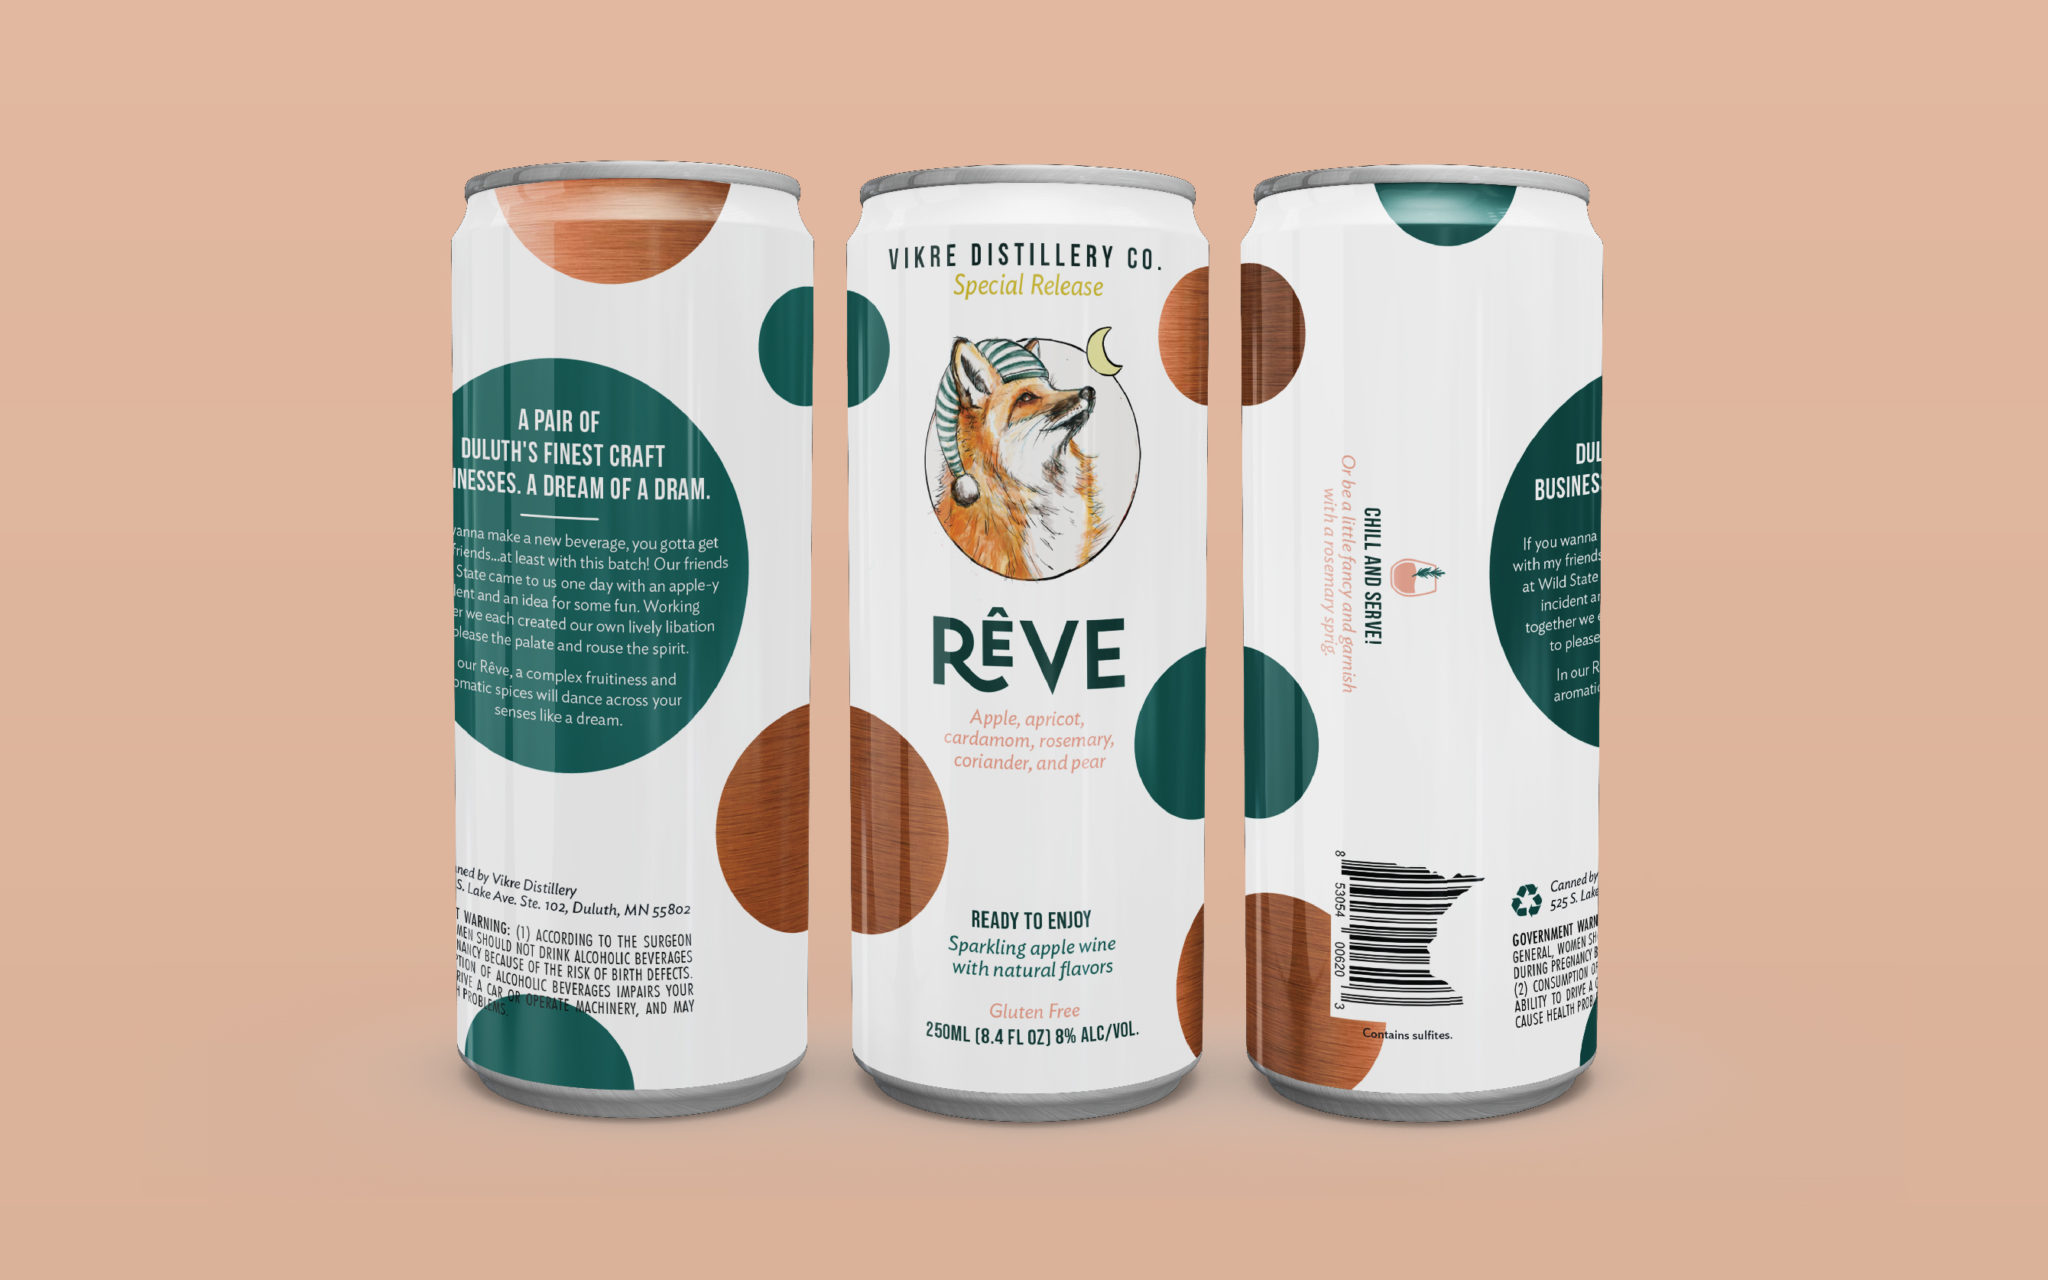 Vikre Distillery Rêve canned cocktail, branding and can design created by Šek Design Studio